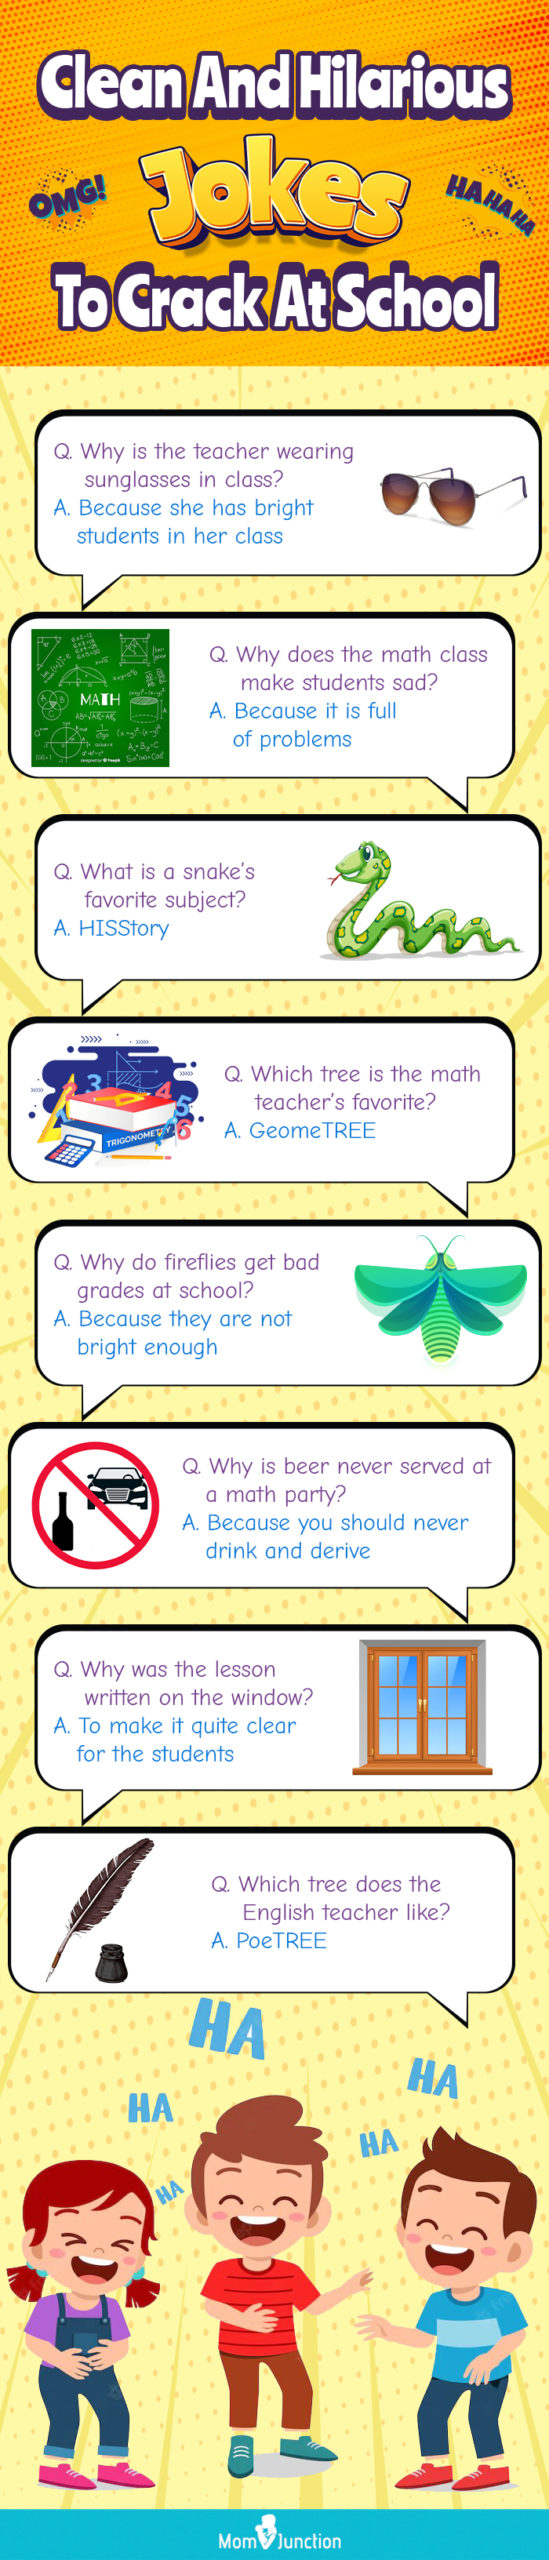 clean and hilarious jokes to crack at school (infographic)